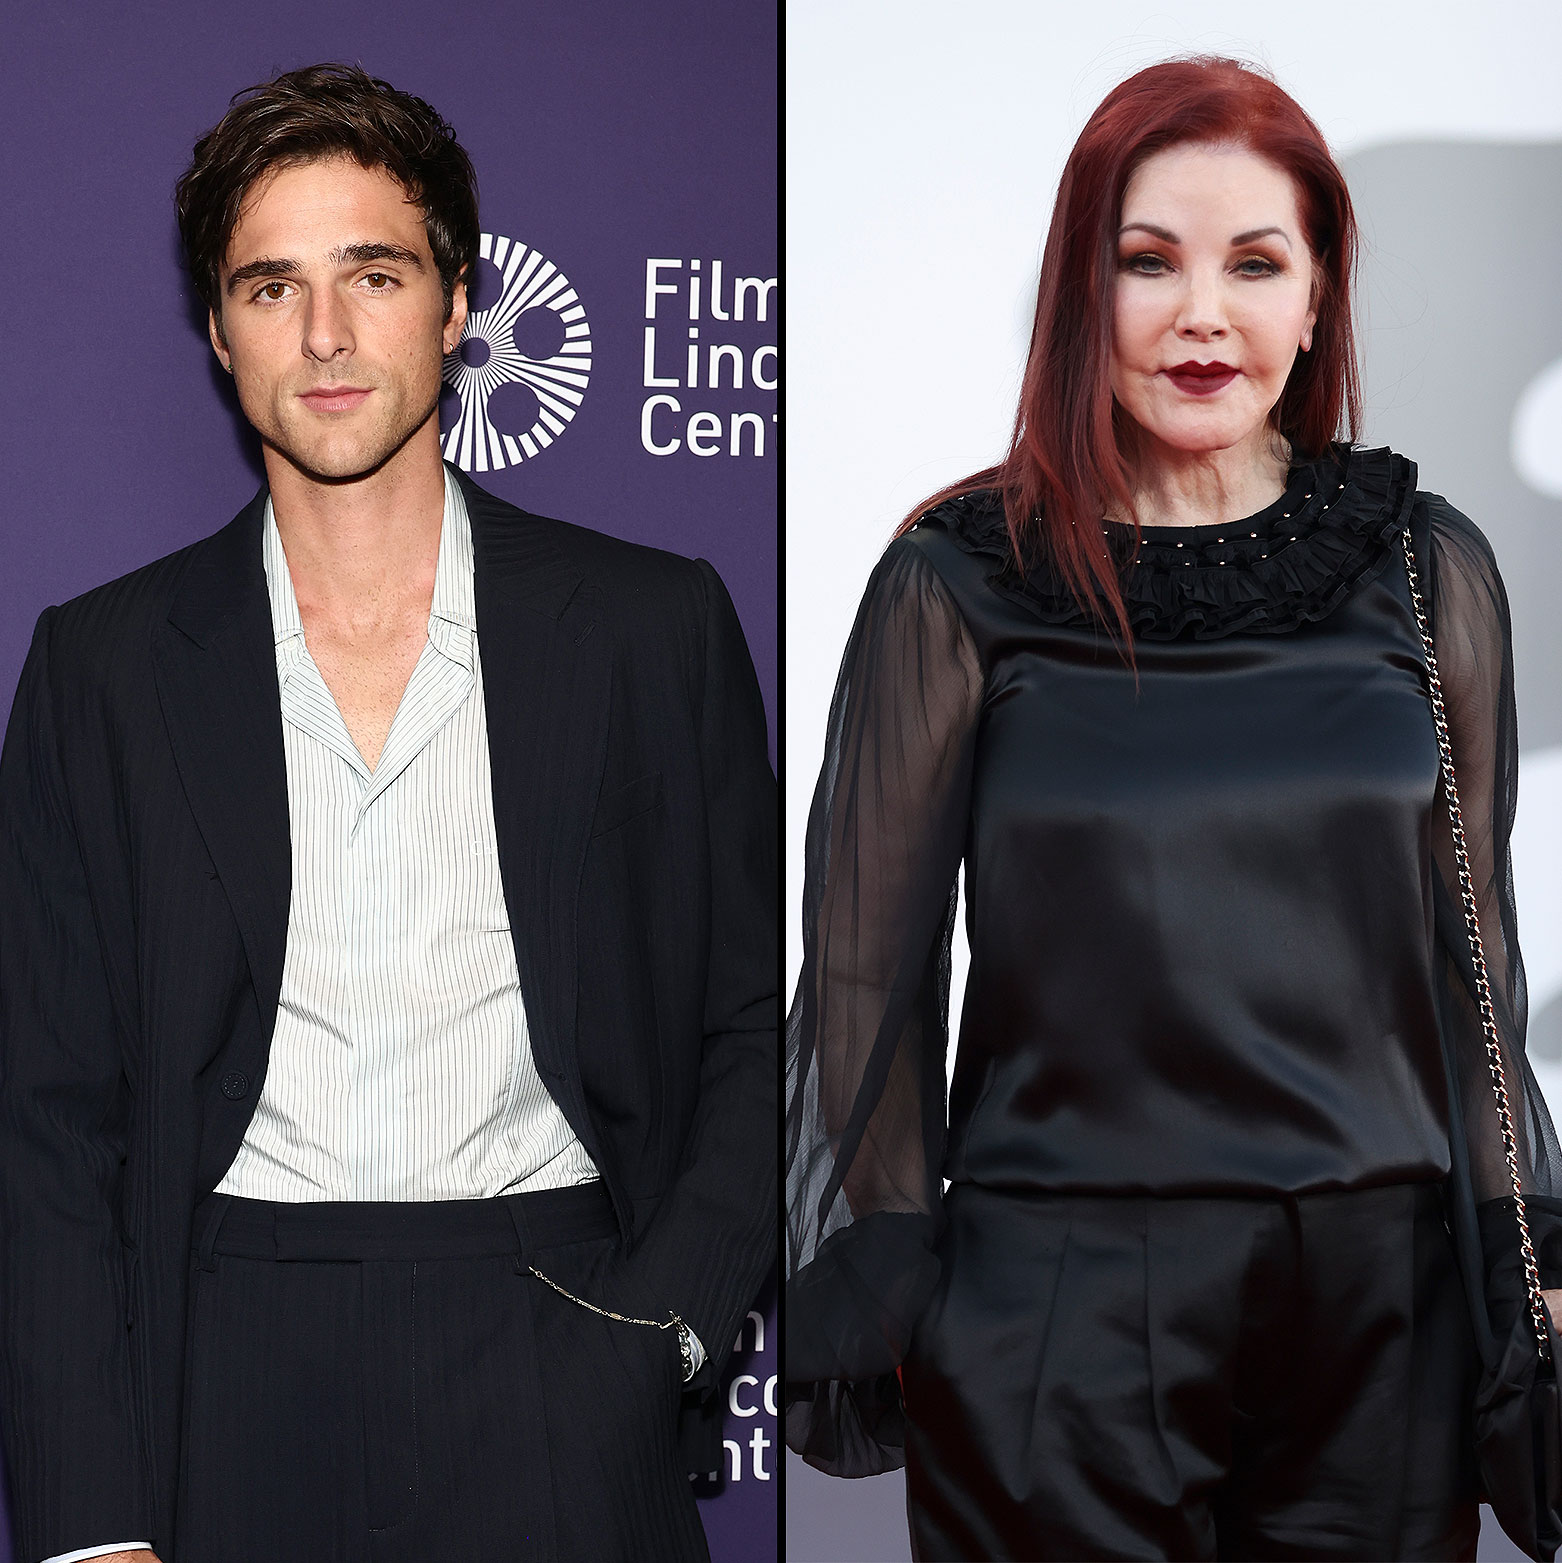 See Jacob Elordi and Cailee Spaeny as Elvis and Priscilla Presley on Set